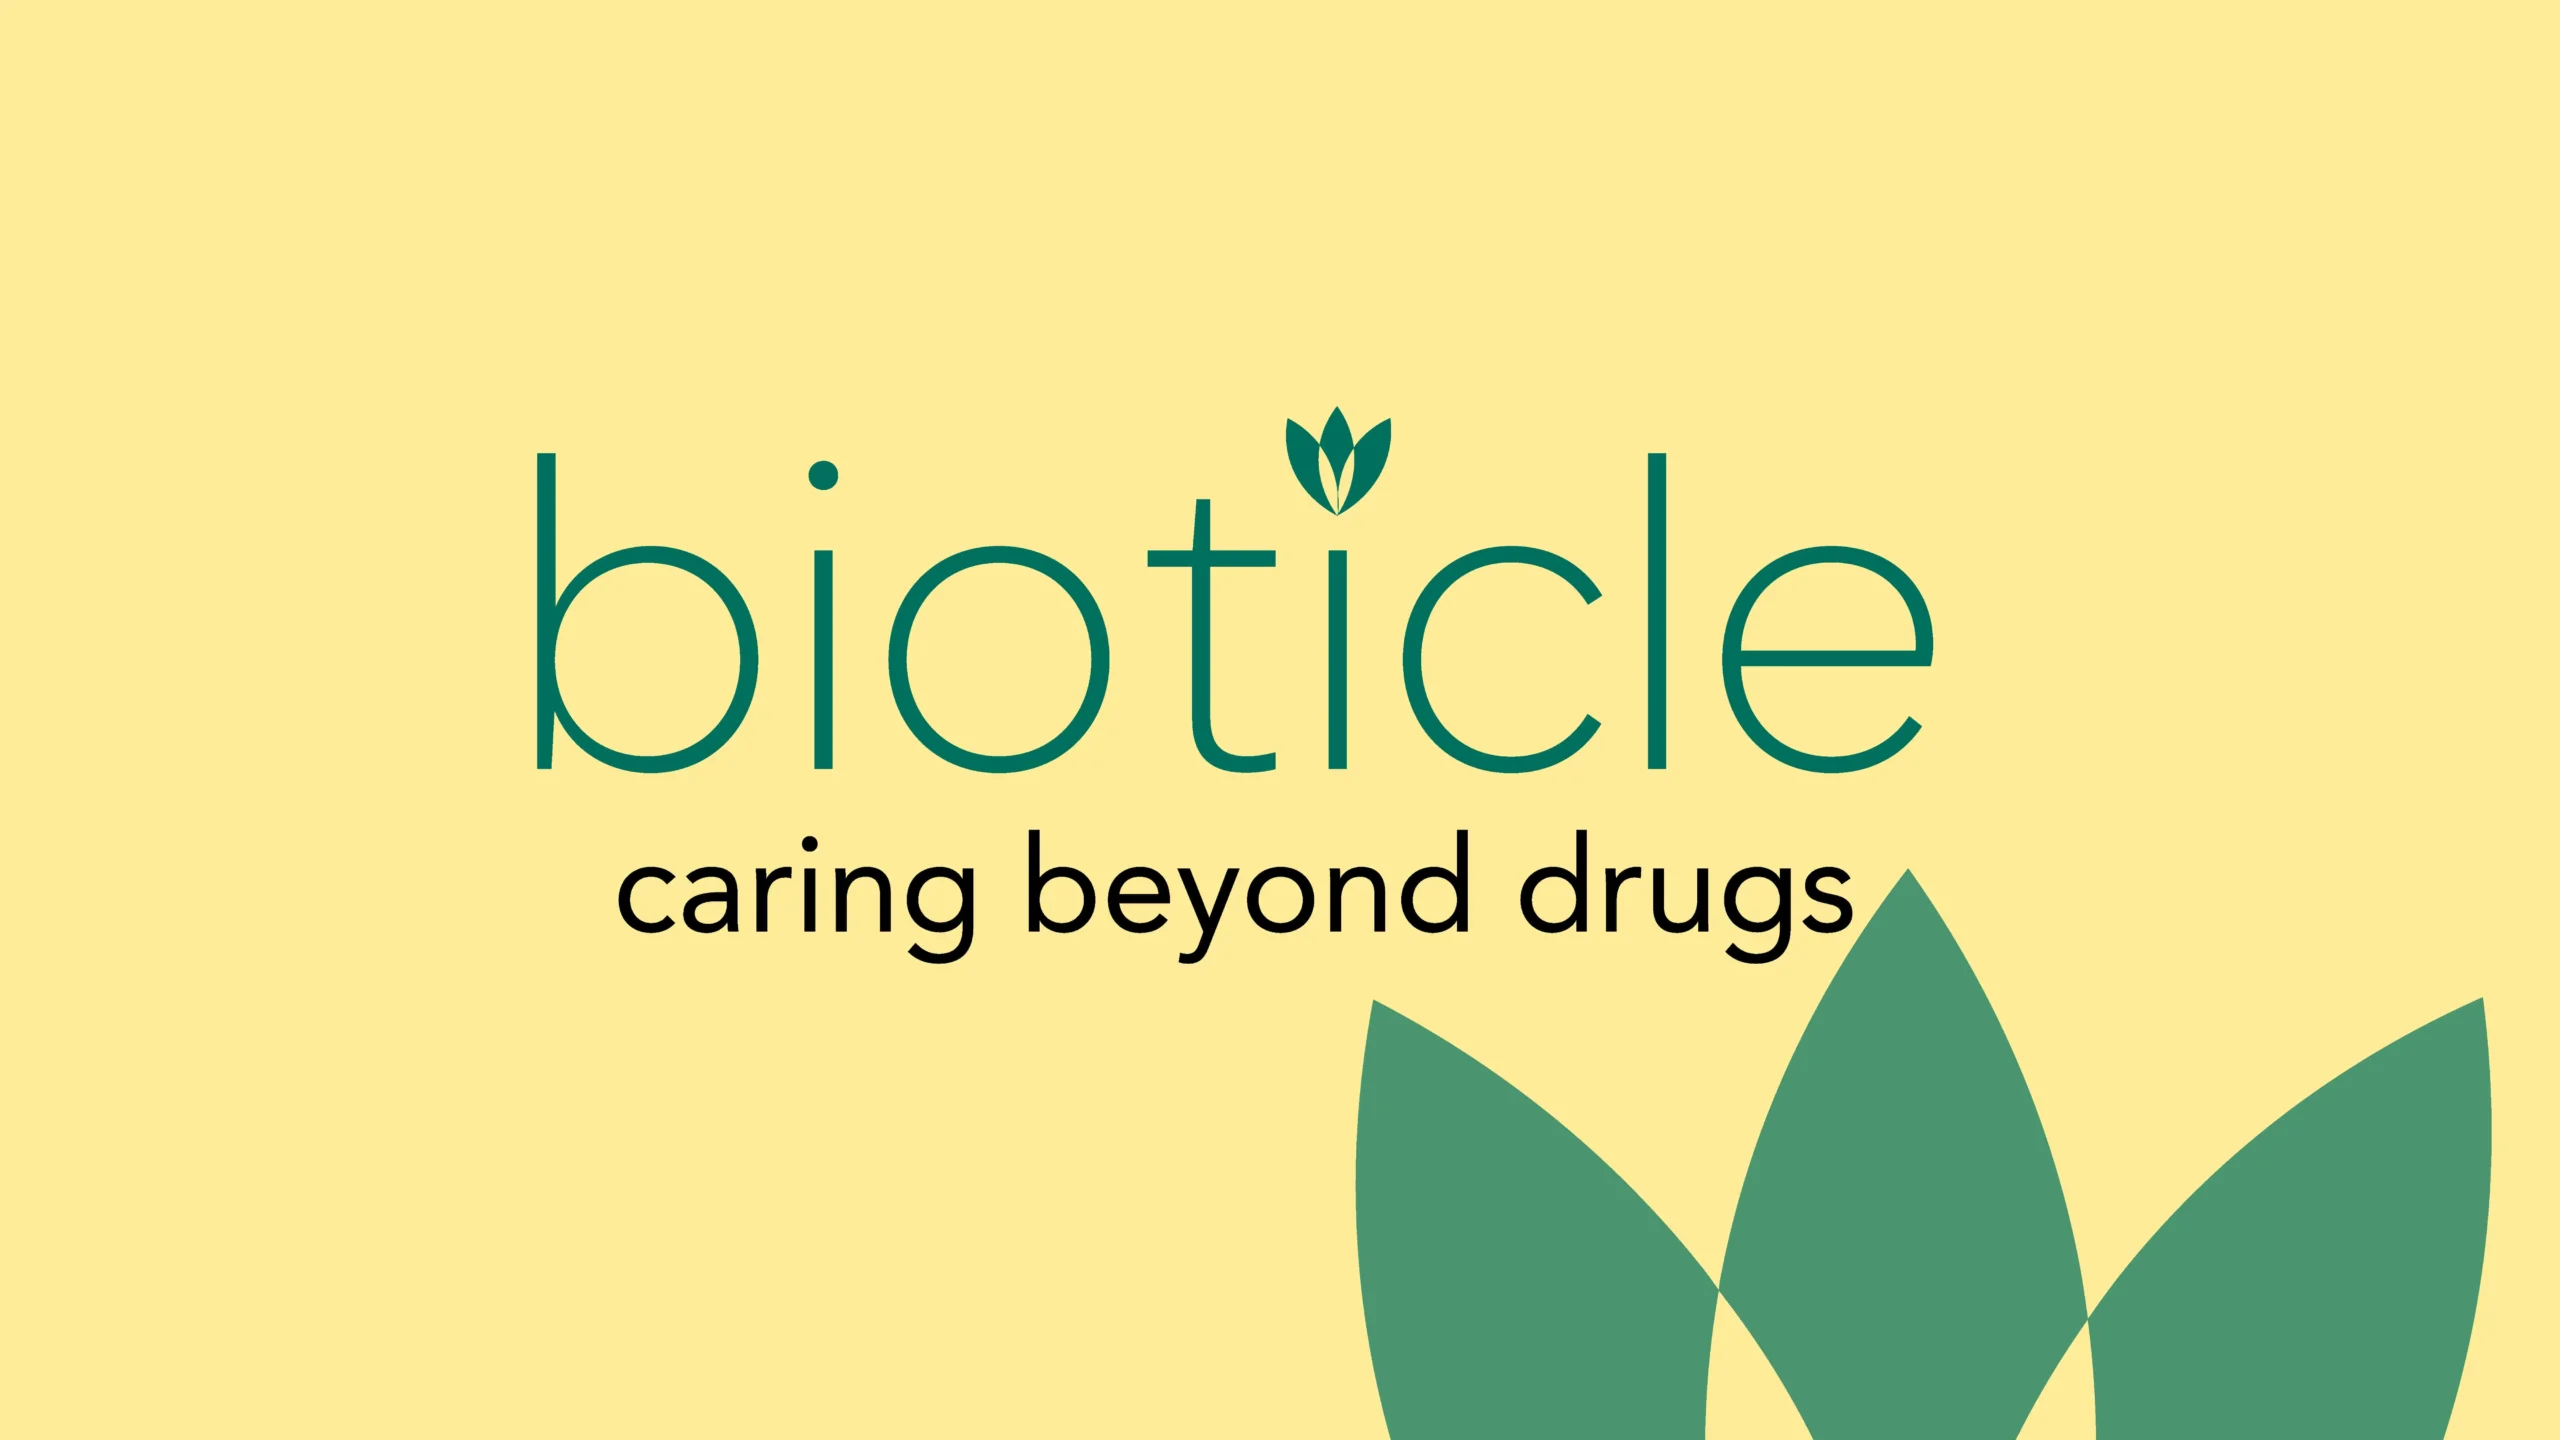 Bioticle's distinctive logo featuring a stylized vitamin tablet and leaf, symbolizing natural supplements.